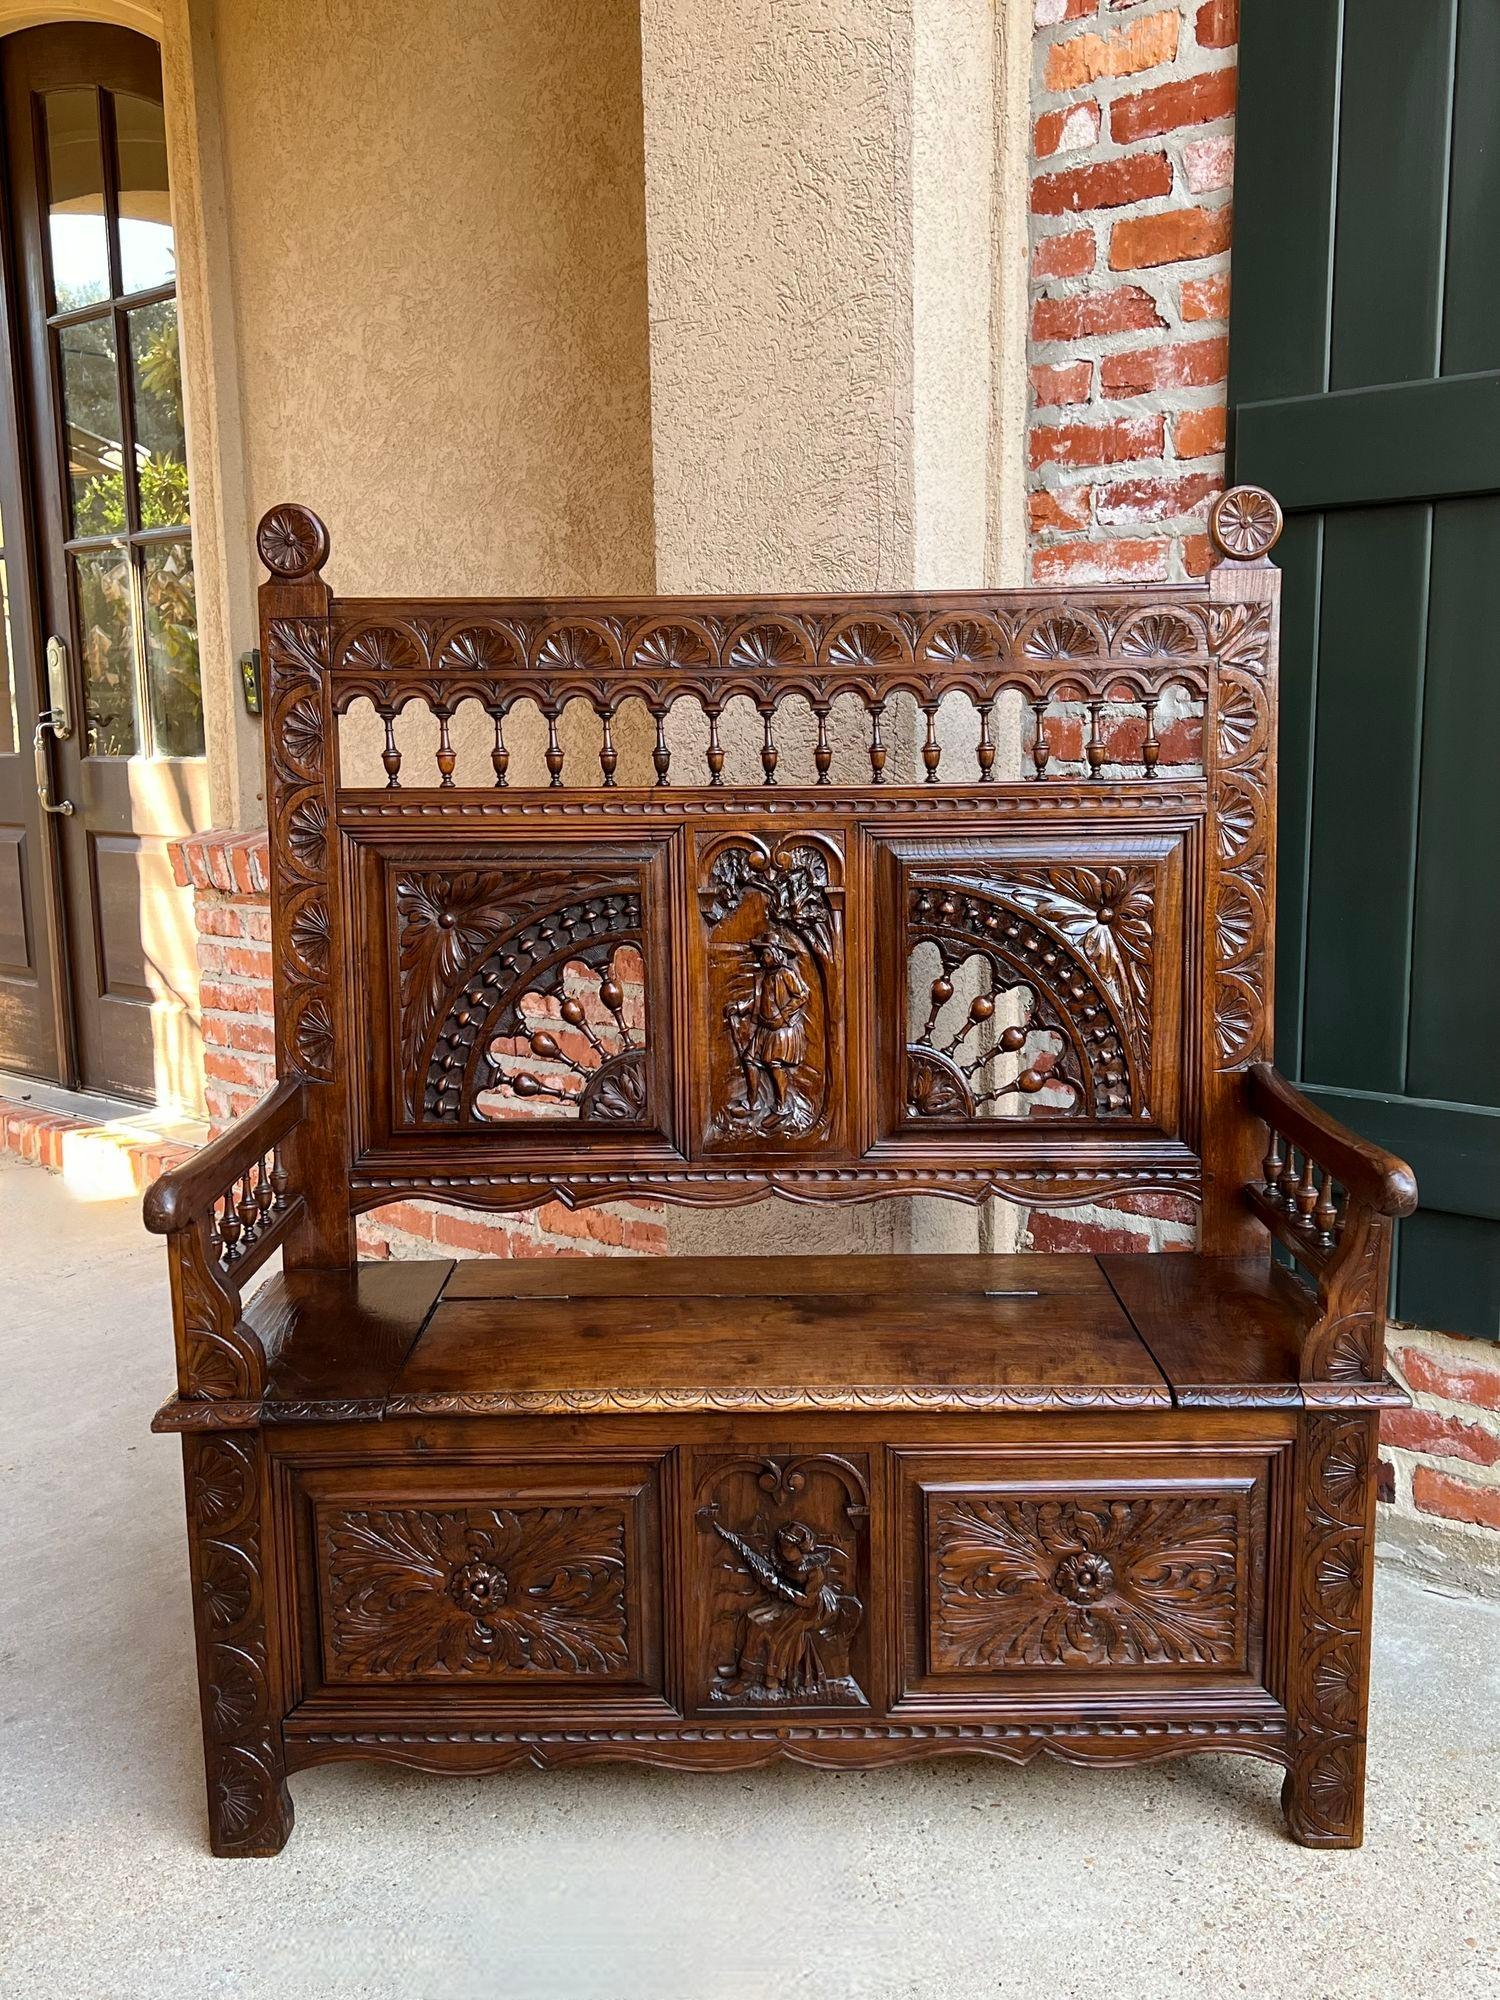 Antique French Carved Oak Hall Bench Breton Brittany Small Settee Pew Chest.

Direct from France, a wonderful antique French hall bench, with a charming combination of French style and versatile size. Intricate Brittany details include a carved